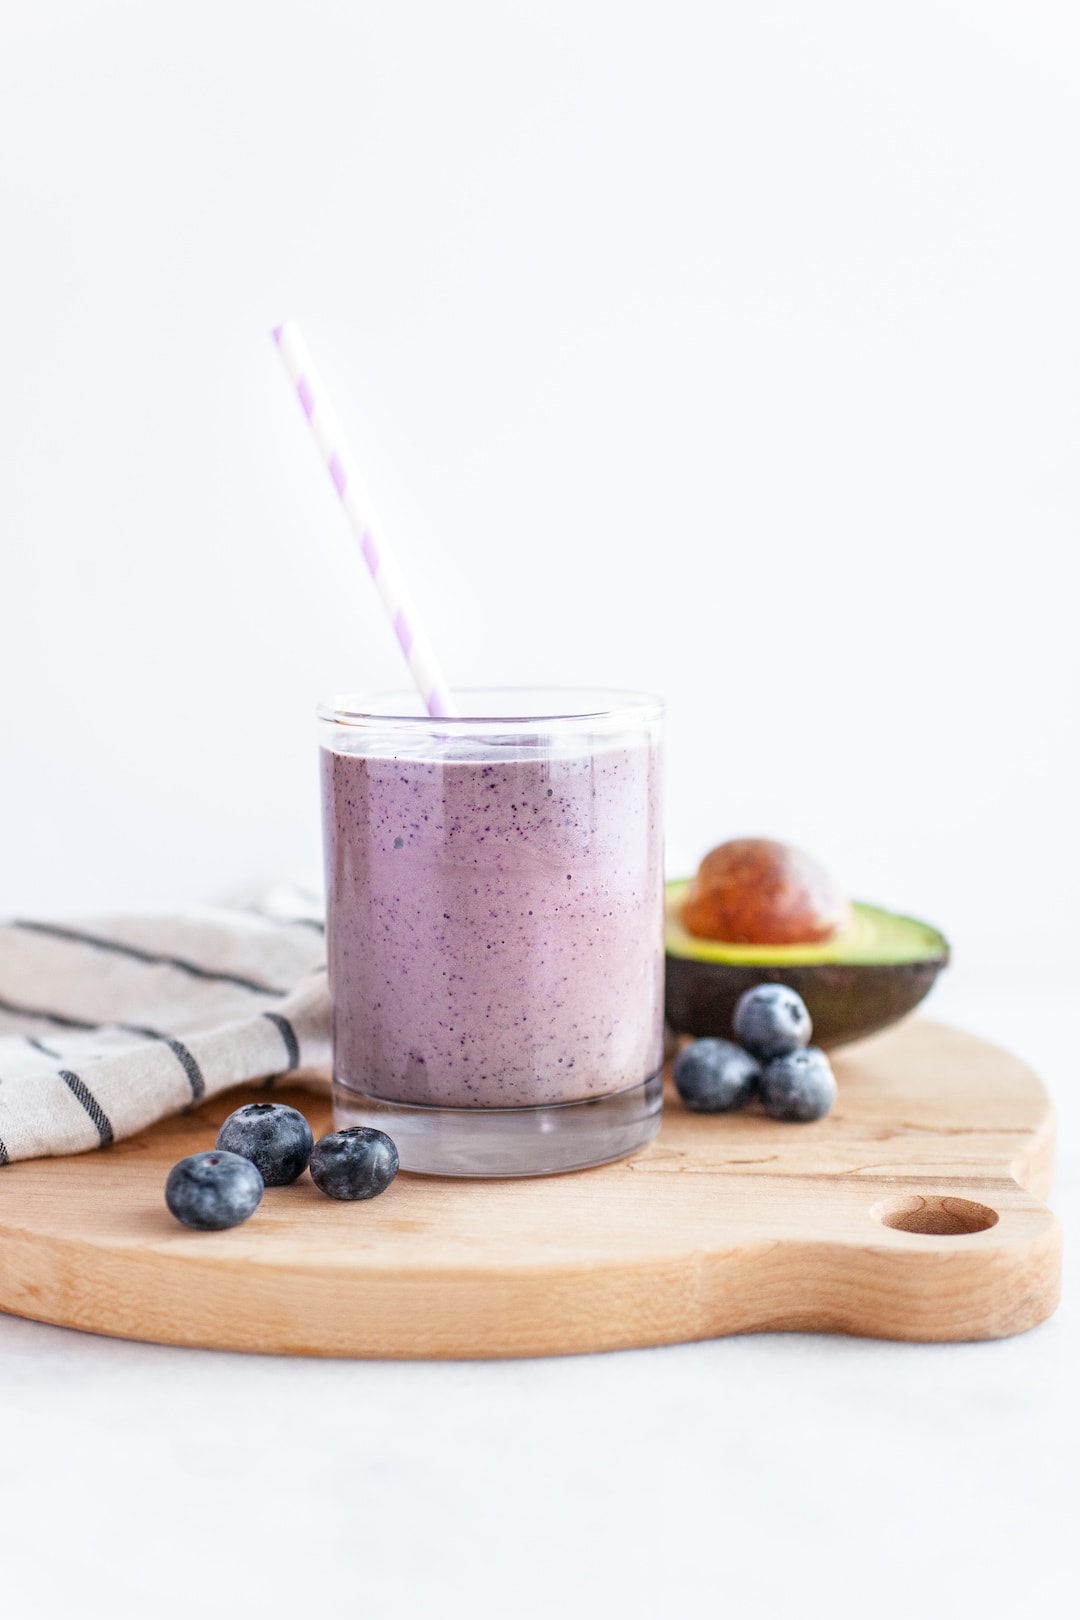 Creamy Blueberry Avocado Smoothie in a glass with a purple straw